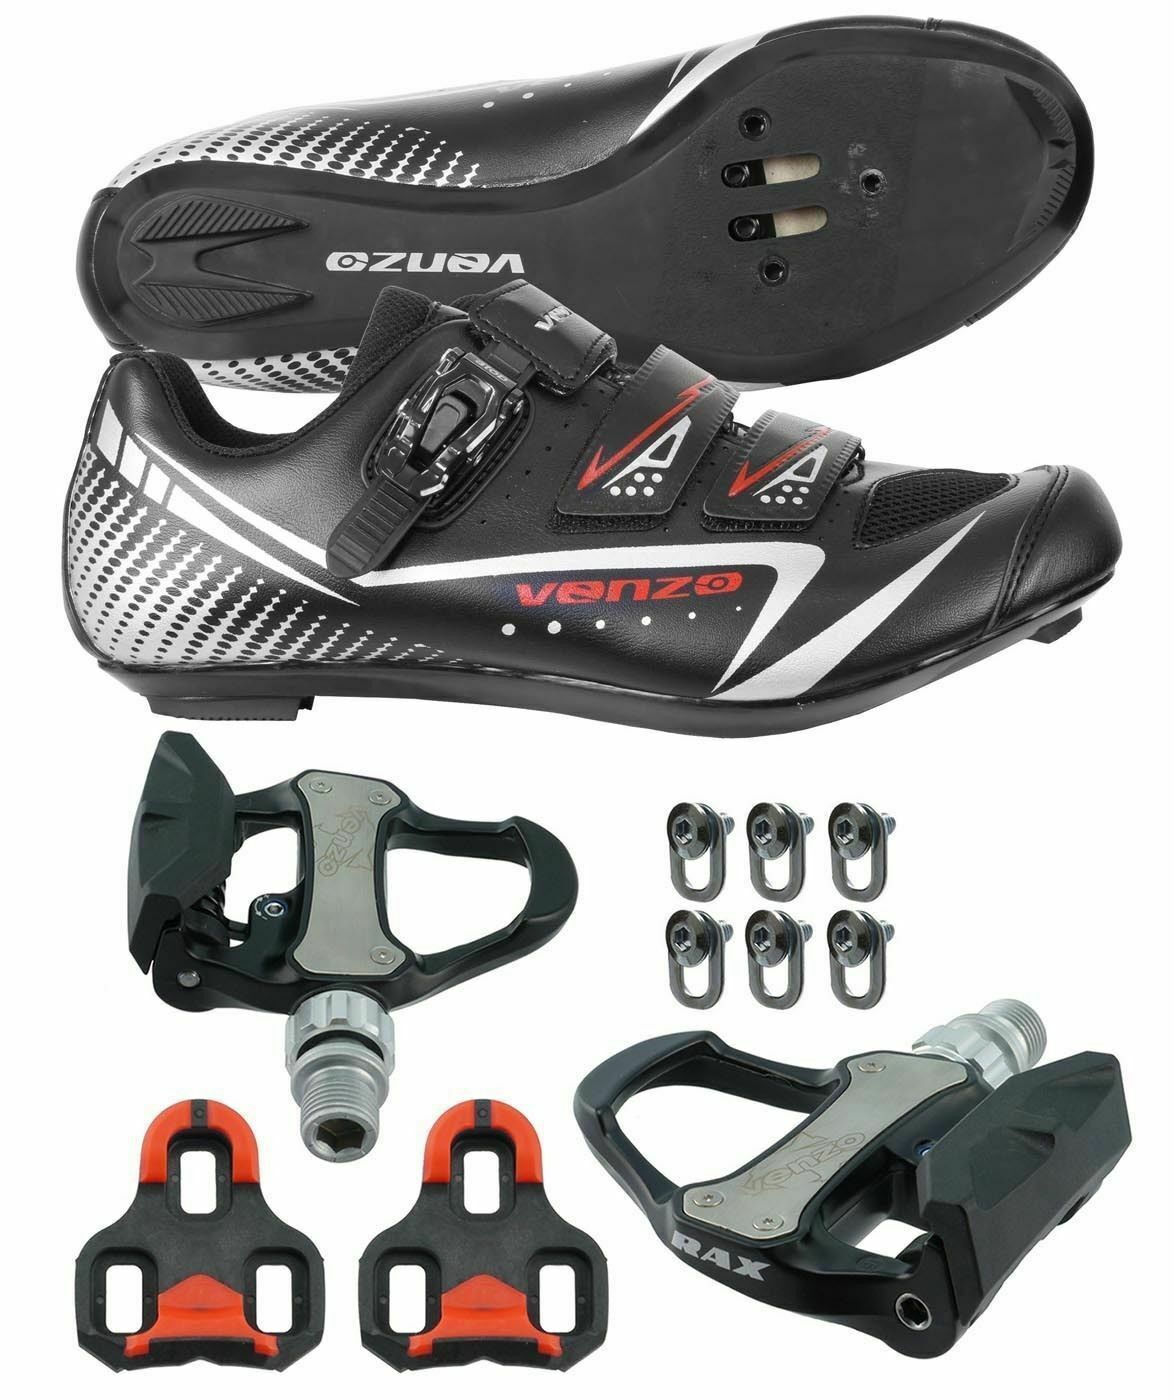 road cycling pedals and cleats